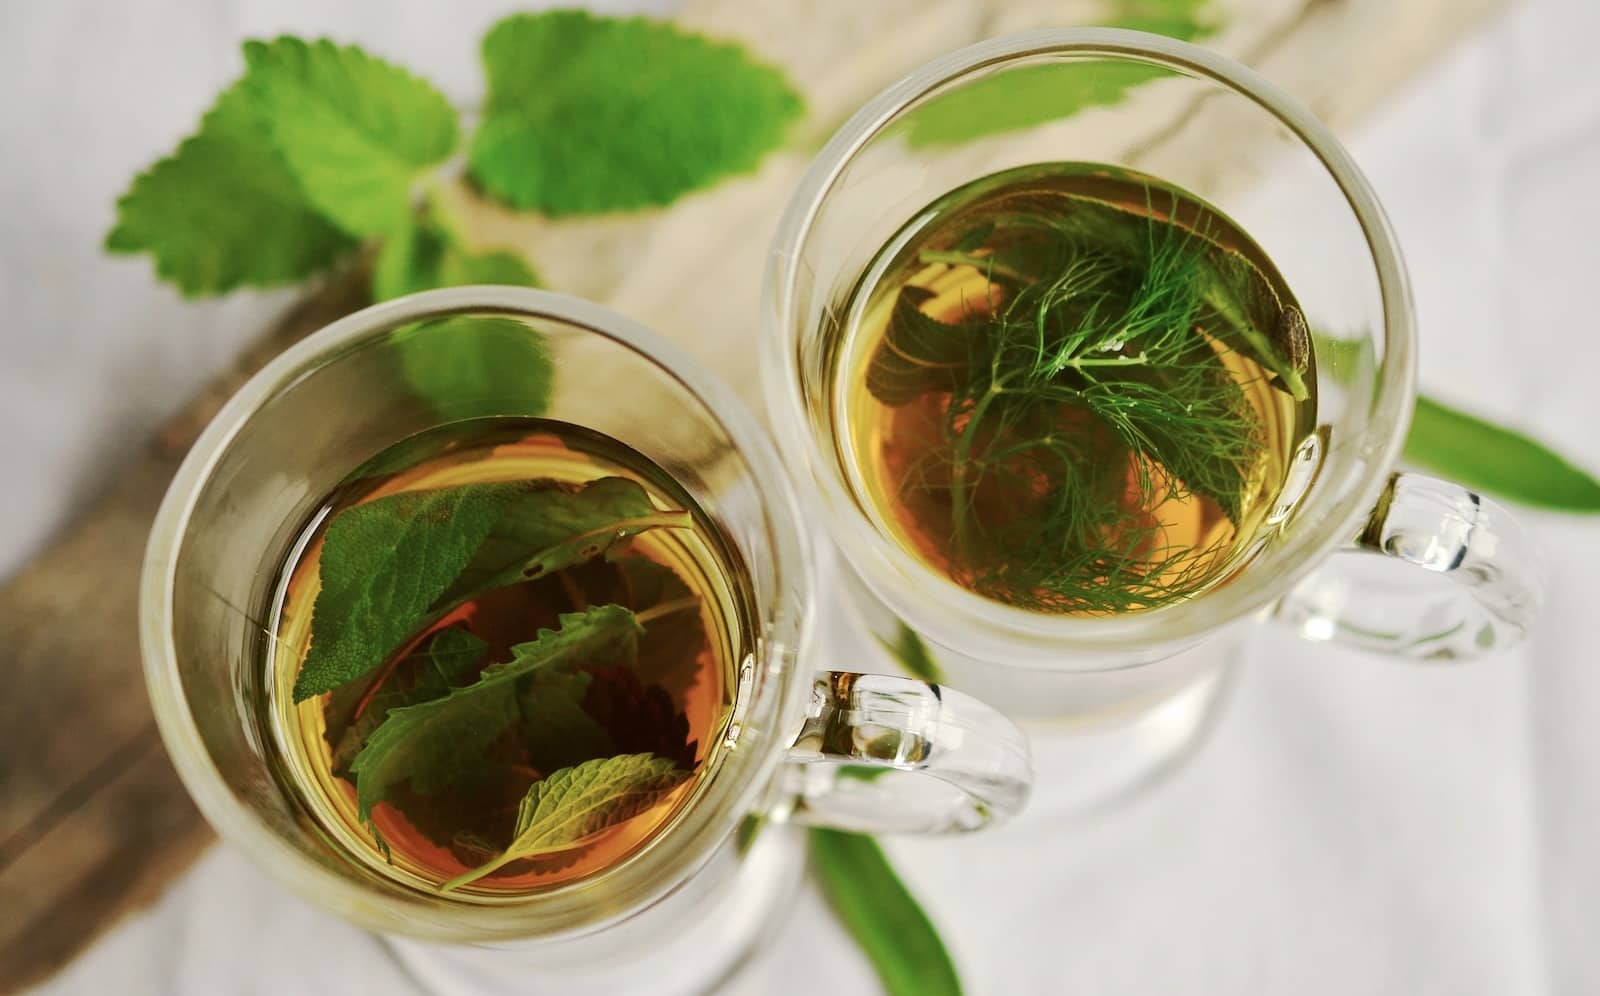 Herbal tea served in two glasses, taken from above